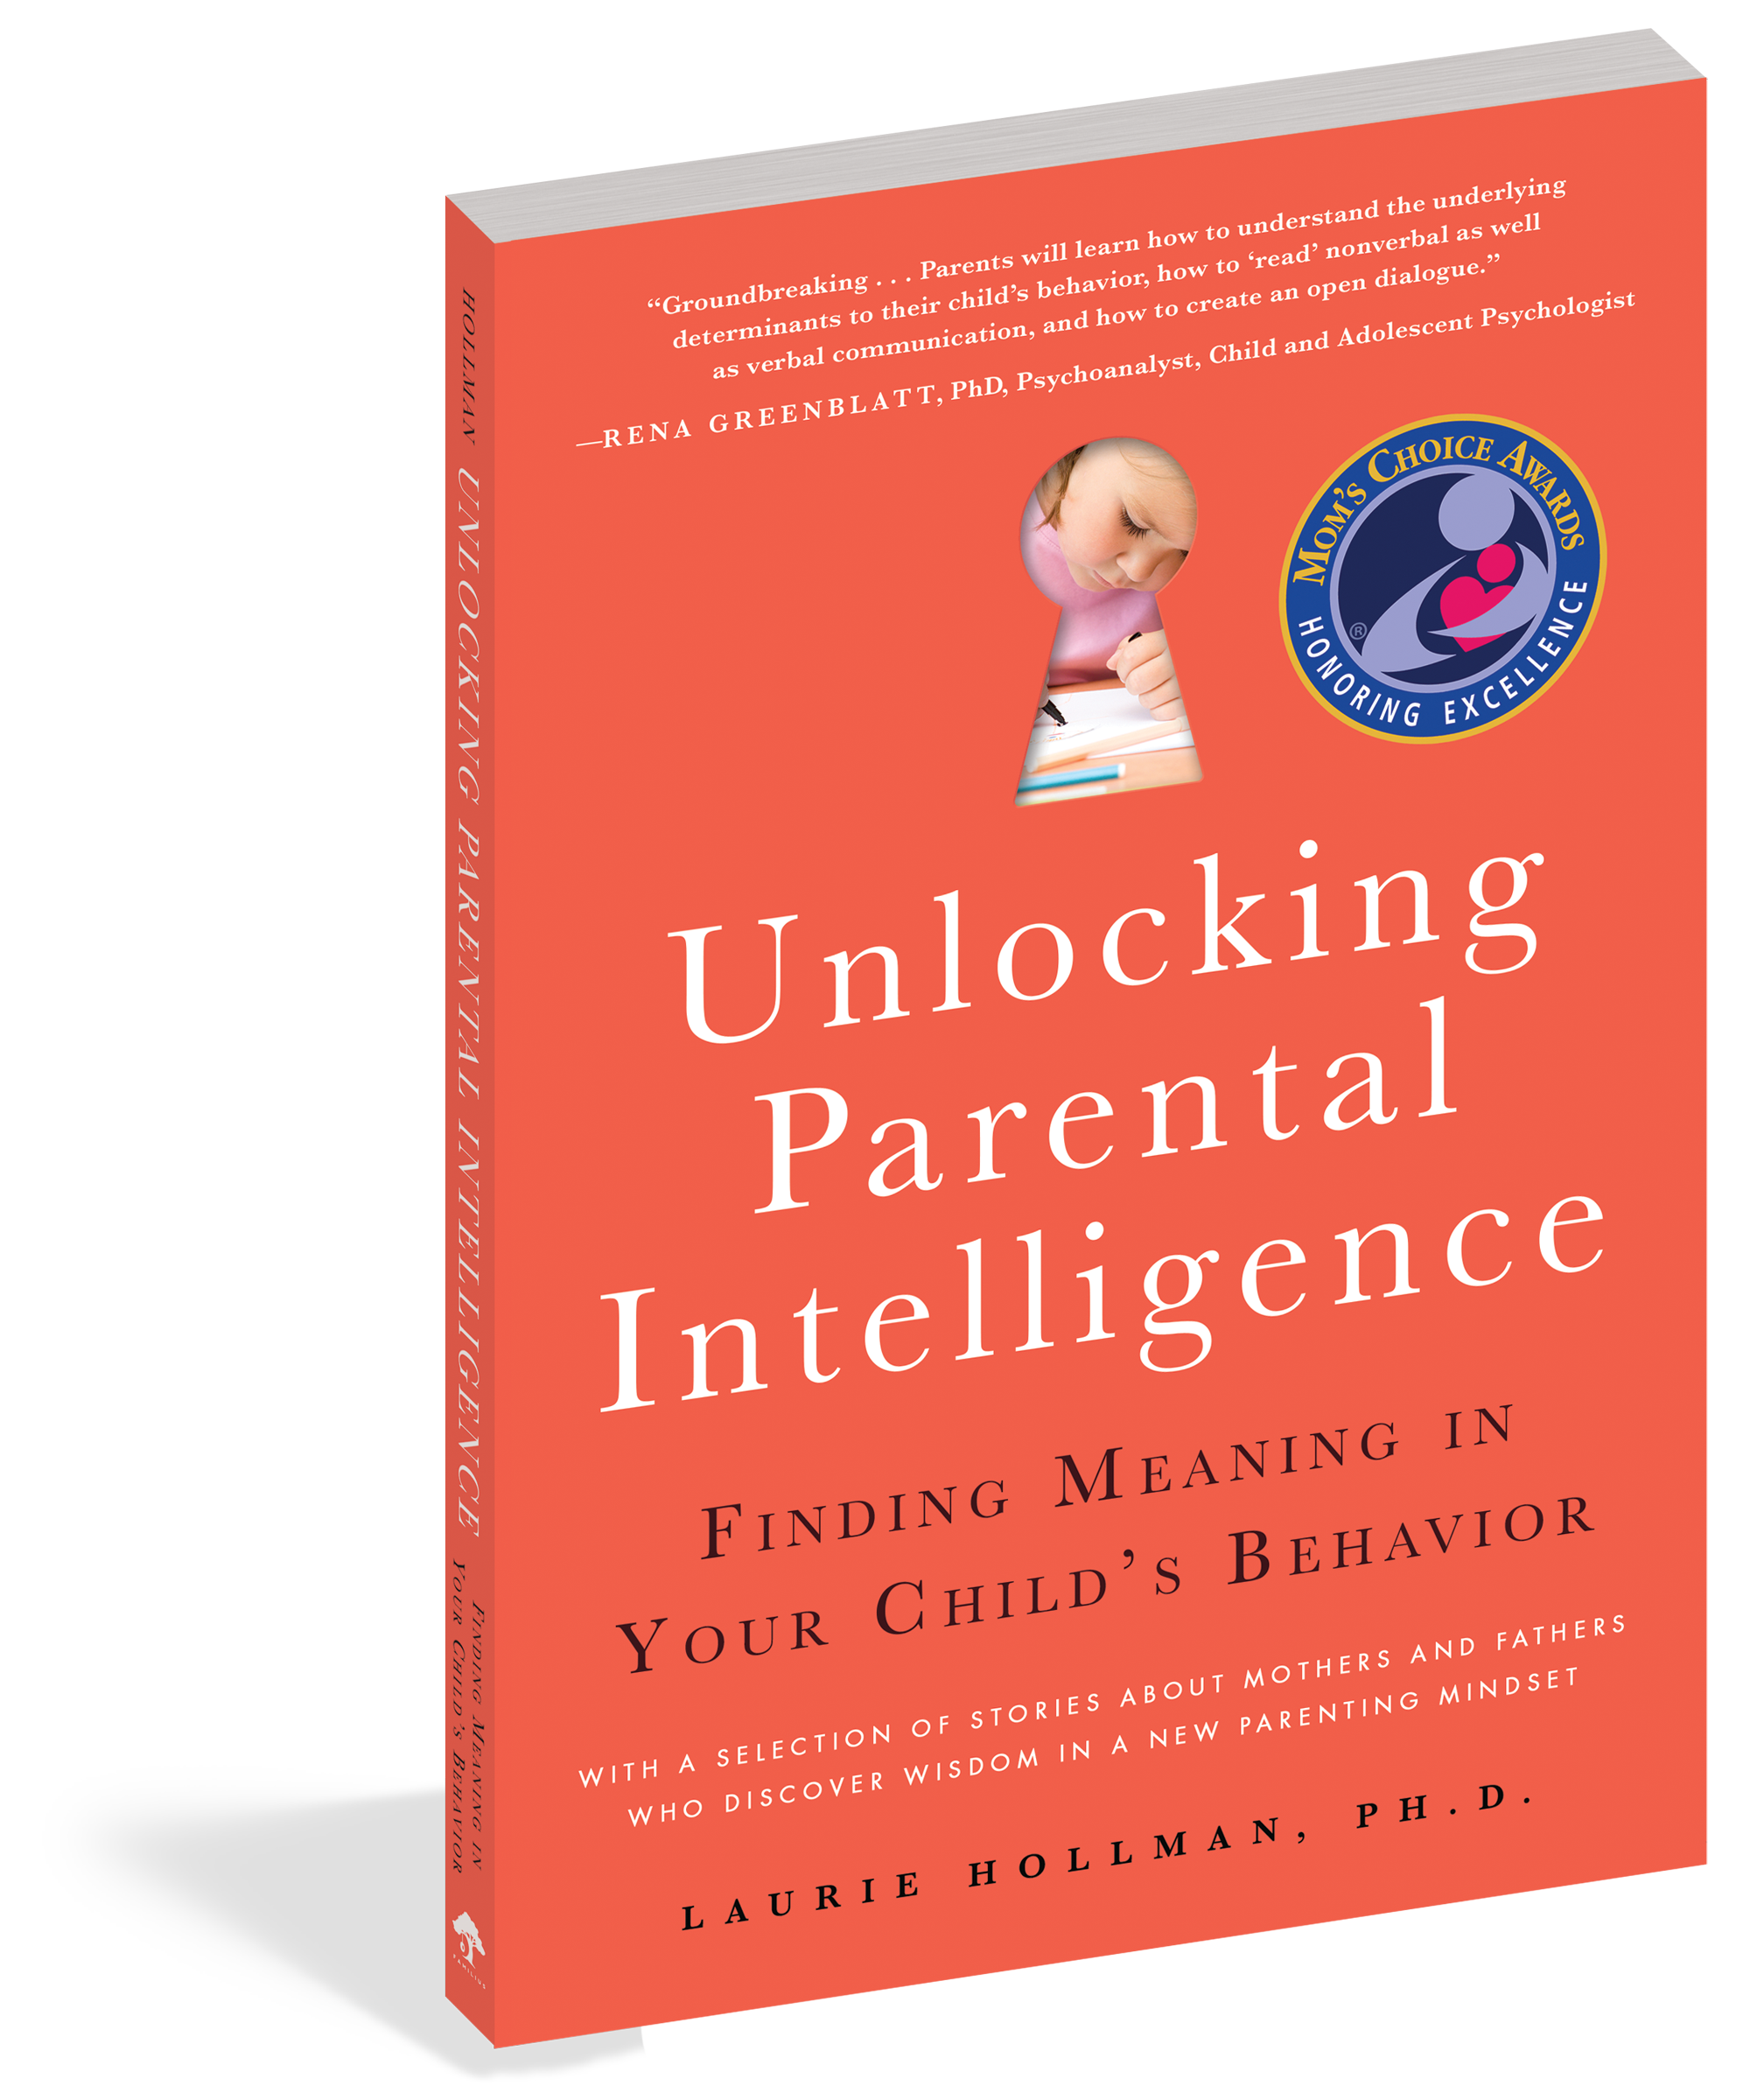 The cover of the book Unlocking Parental Intelligence.